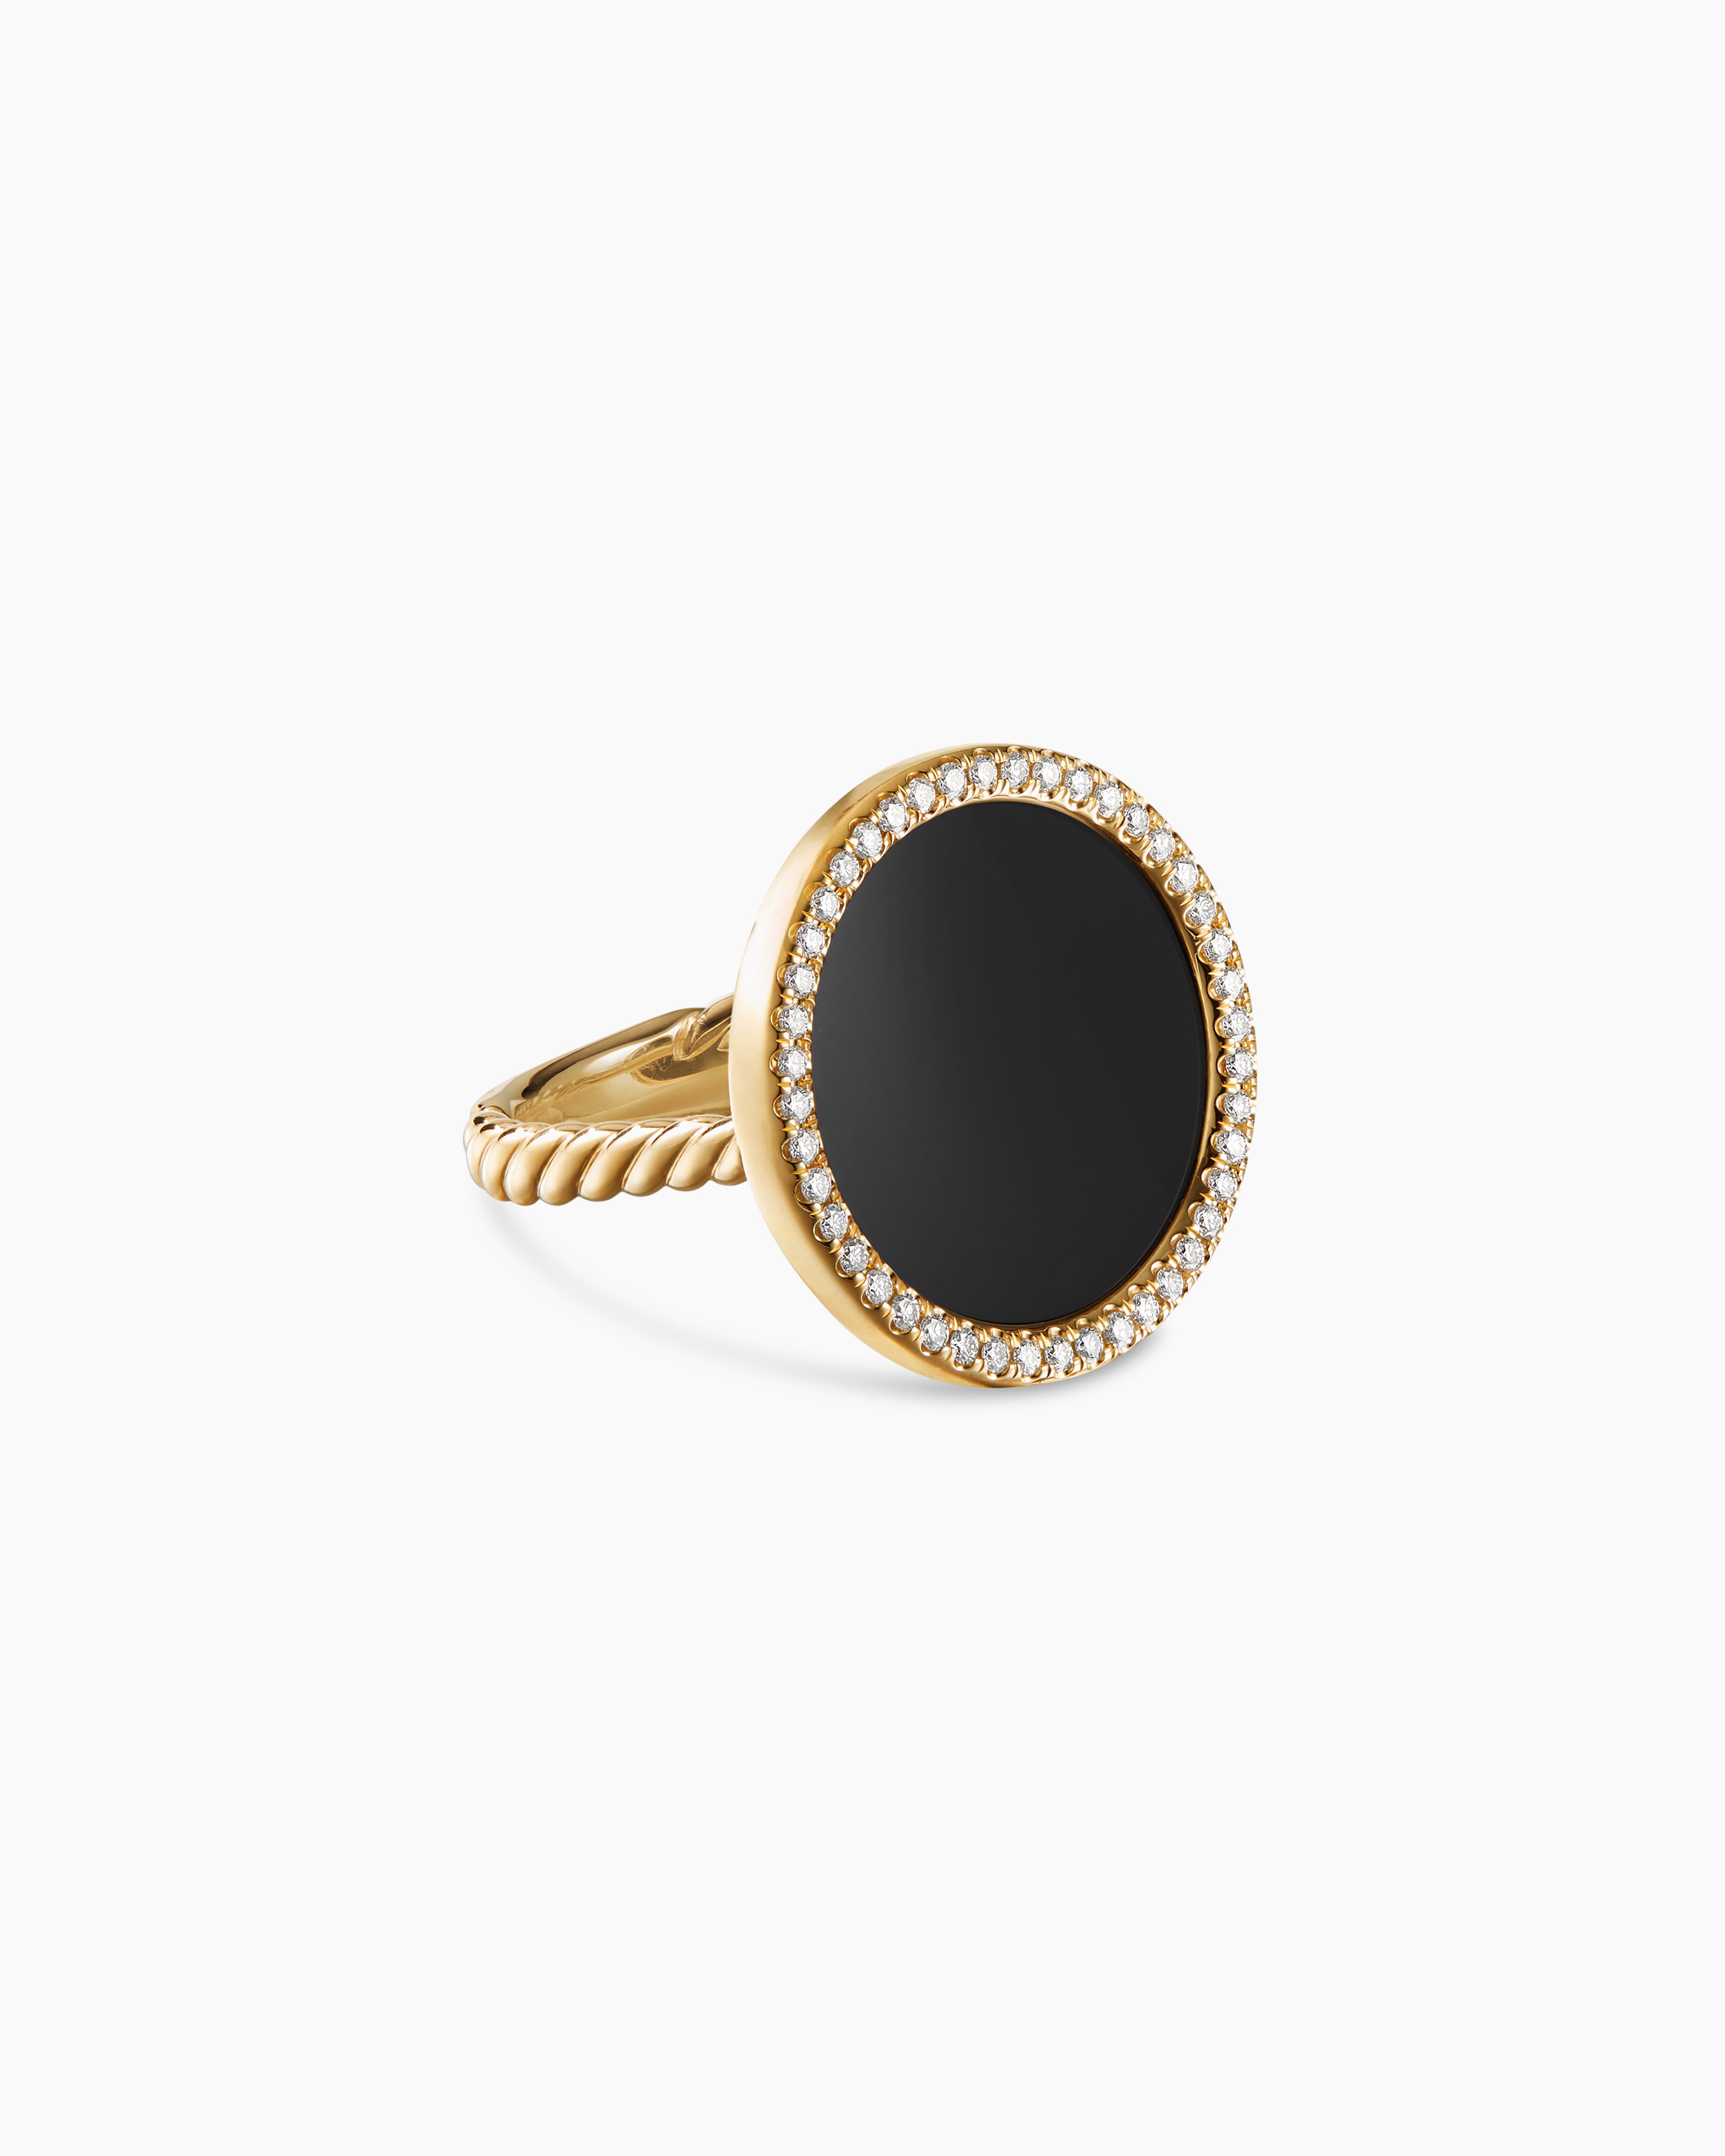 DY Elements® Ring in 18K Yellow Gold with Black Onyx and Diamonds